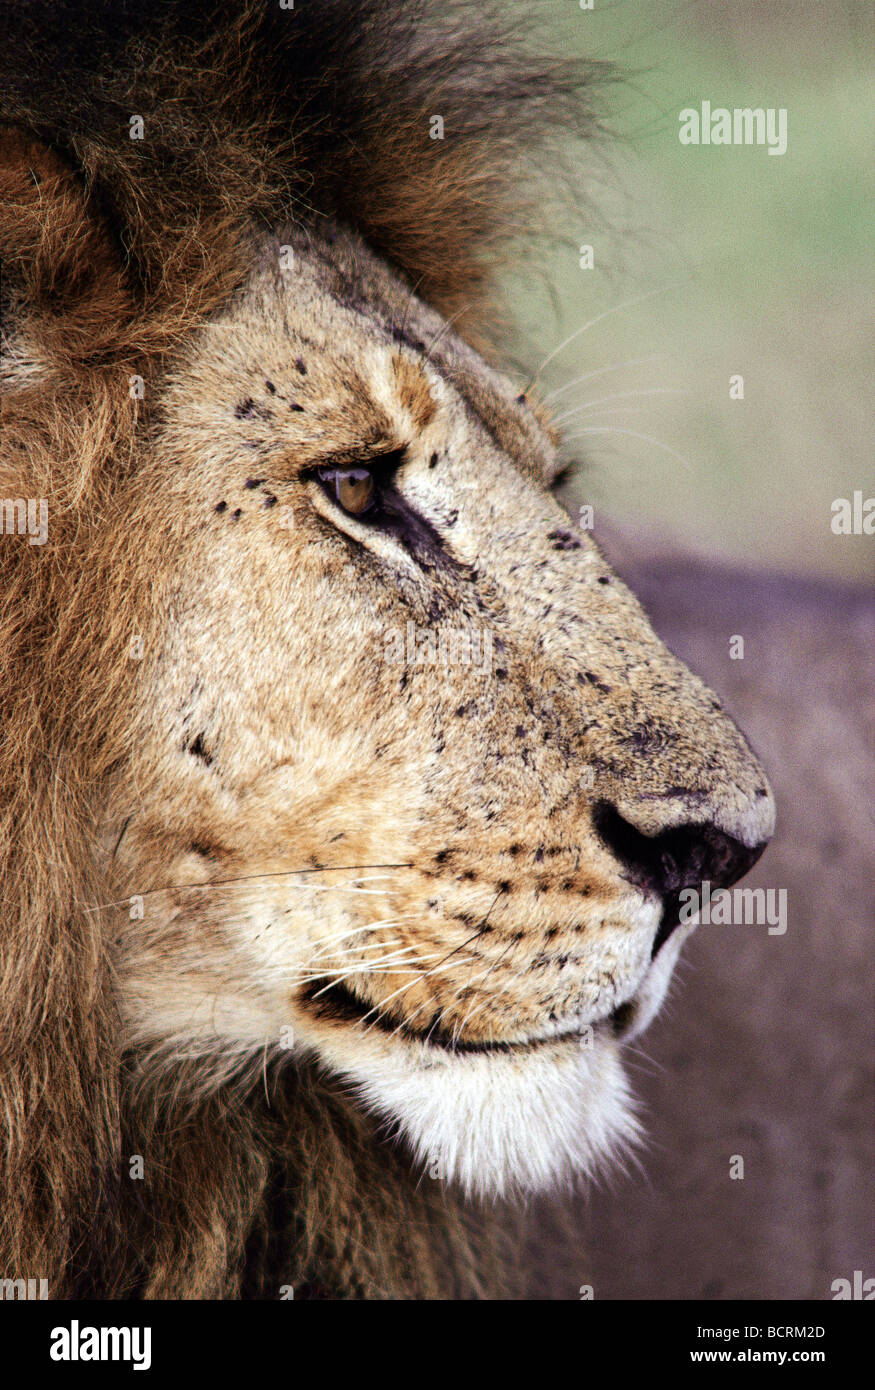 Close up portrait profile of male Lion showing ticks on his face Masai Mara National Reserve Kenya East Africa Stock Photo